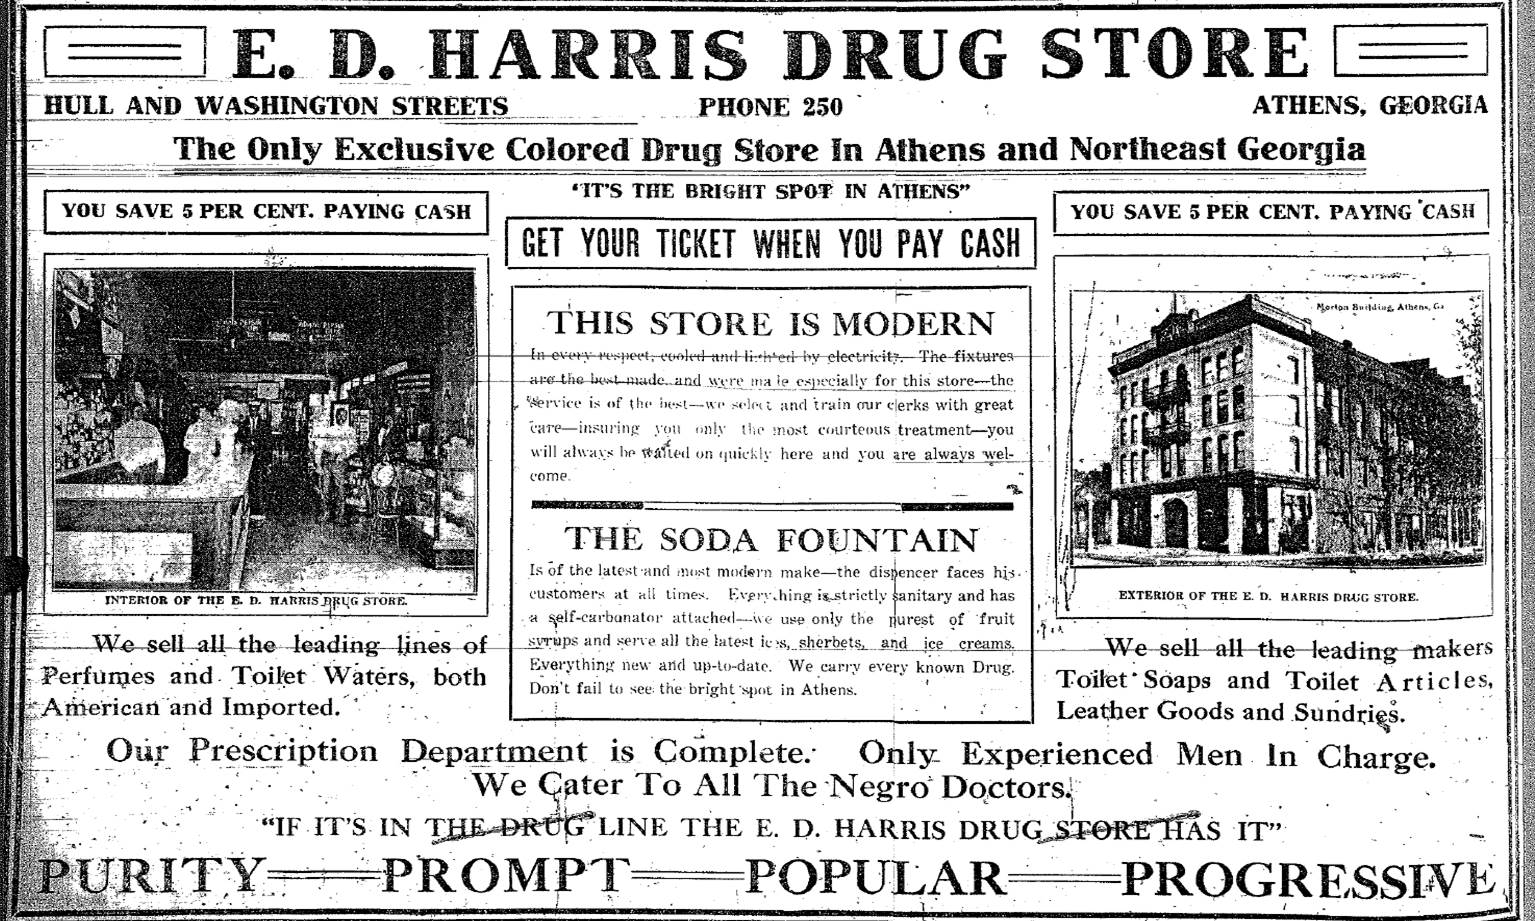 An Article About the Pharmacy